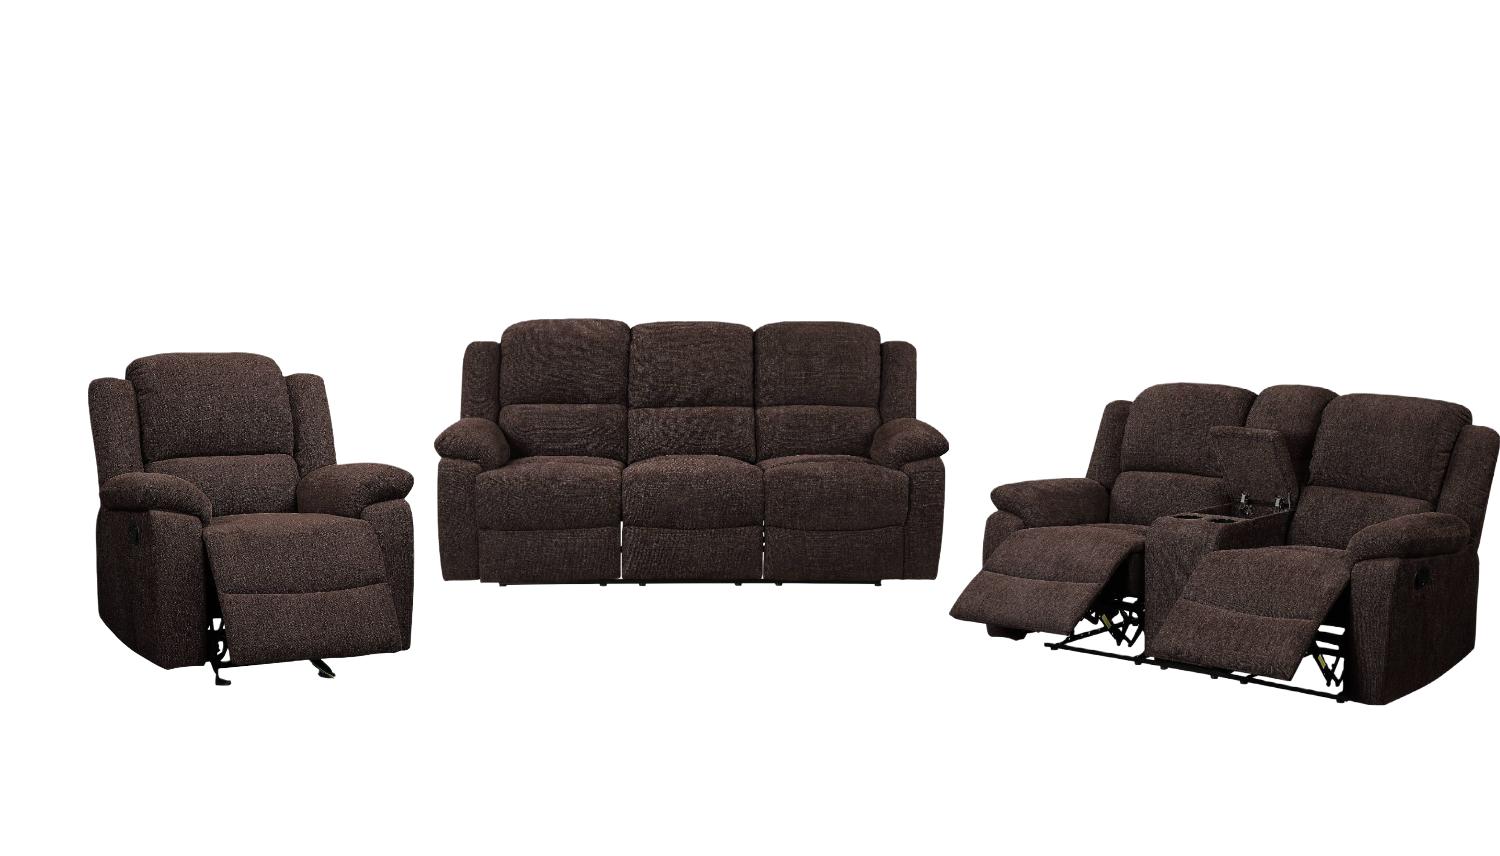 Contemporary Sofa Loveseat and Chair Set Madden 55445-3pcs in Brown Chenille